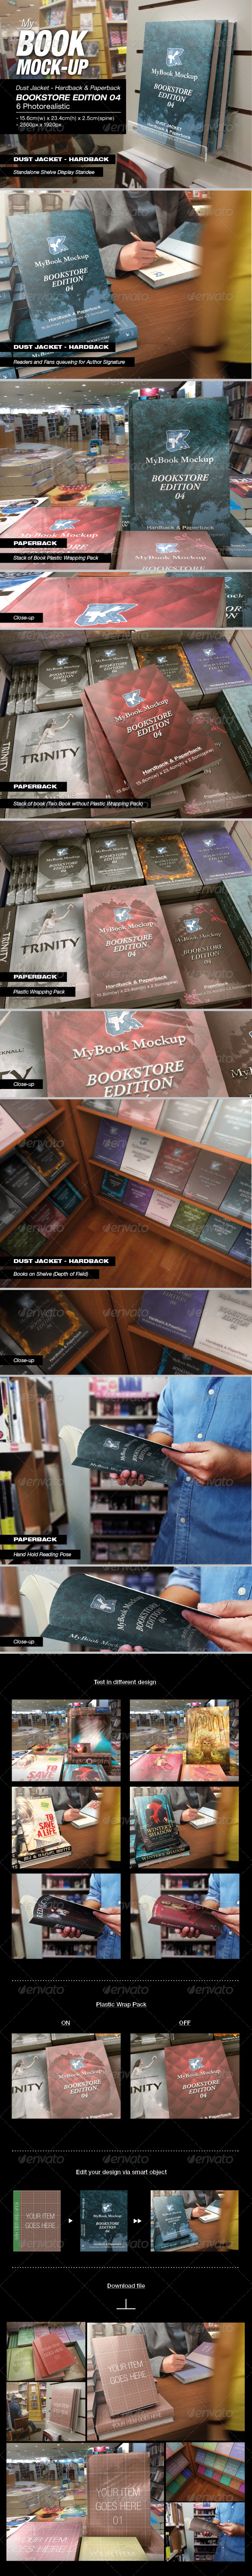 GraphicRiver MyBook Mock-up Bookstore Edition 04 7731739